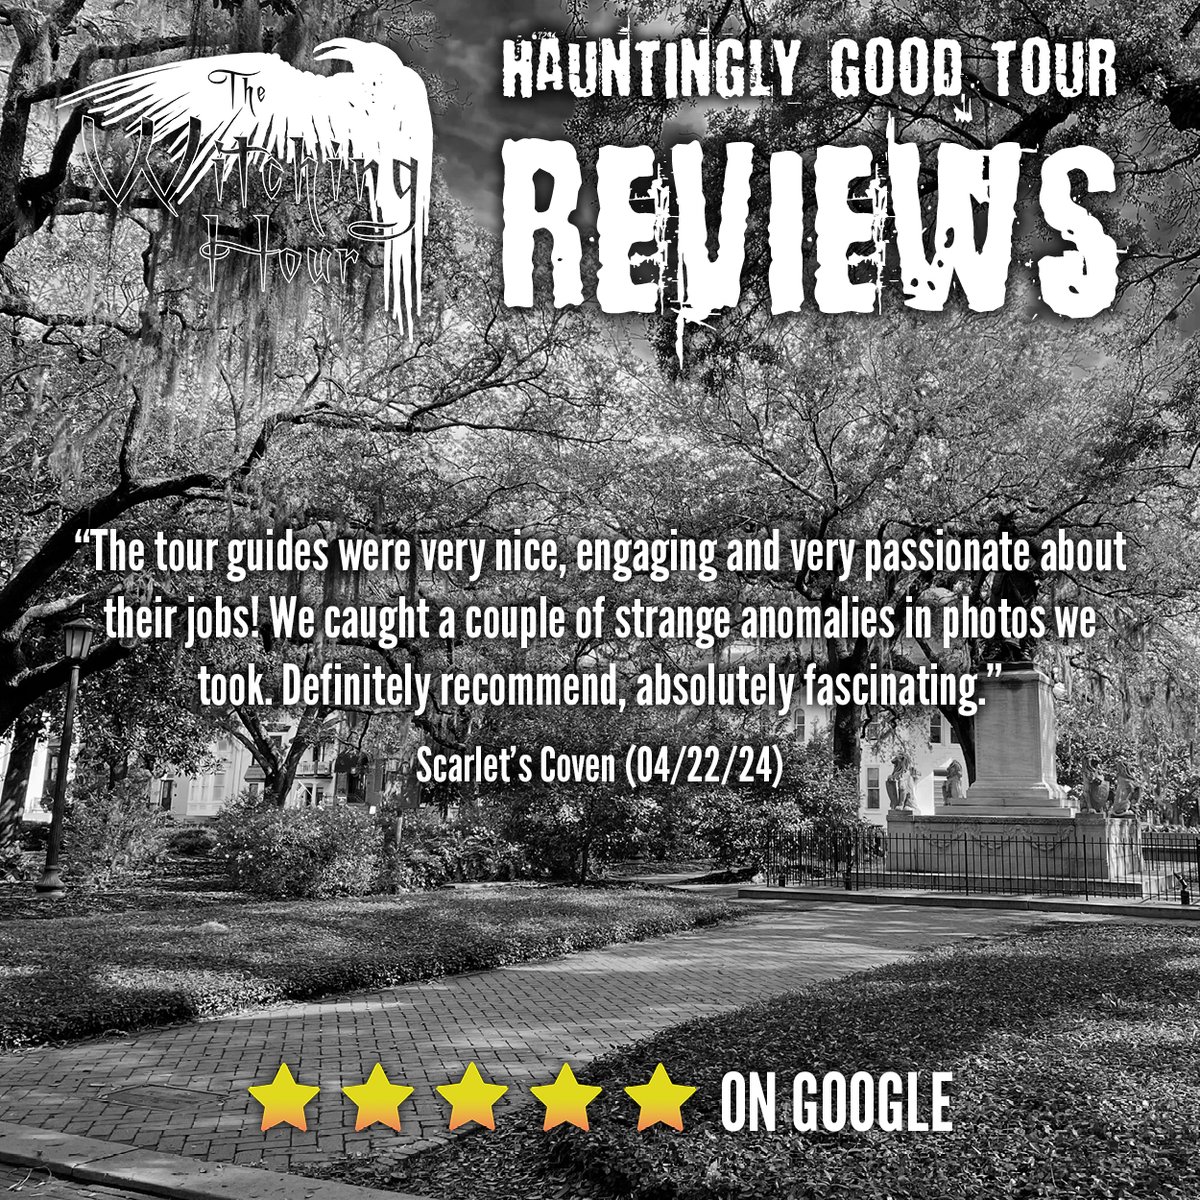 Another 5 star Google Review!

#googlereview #5starreview #visitsavannah #ghosts #haunted #paranormal